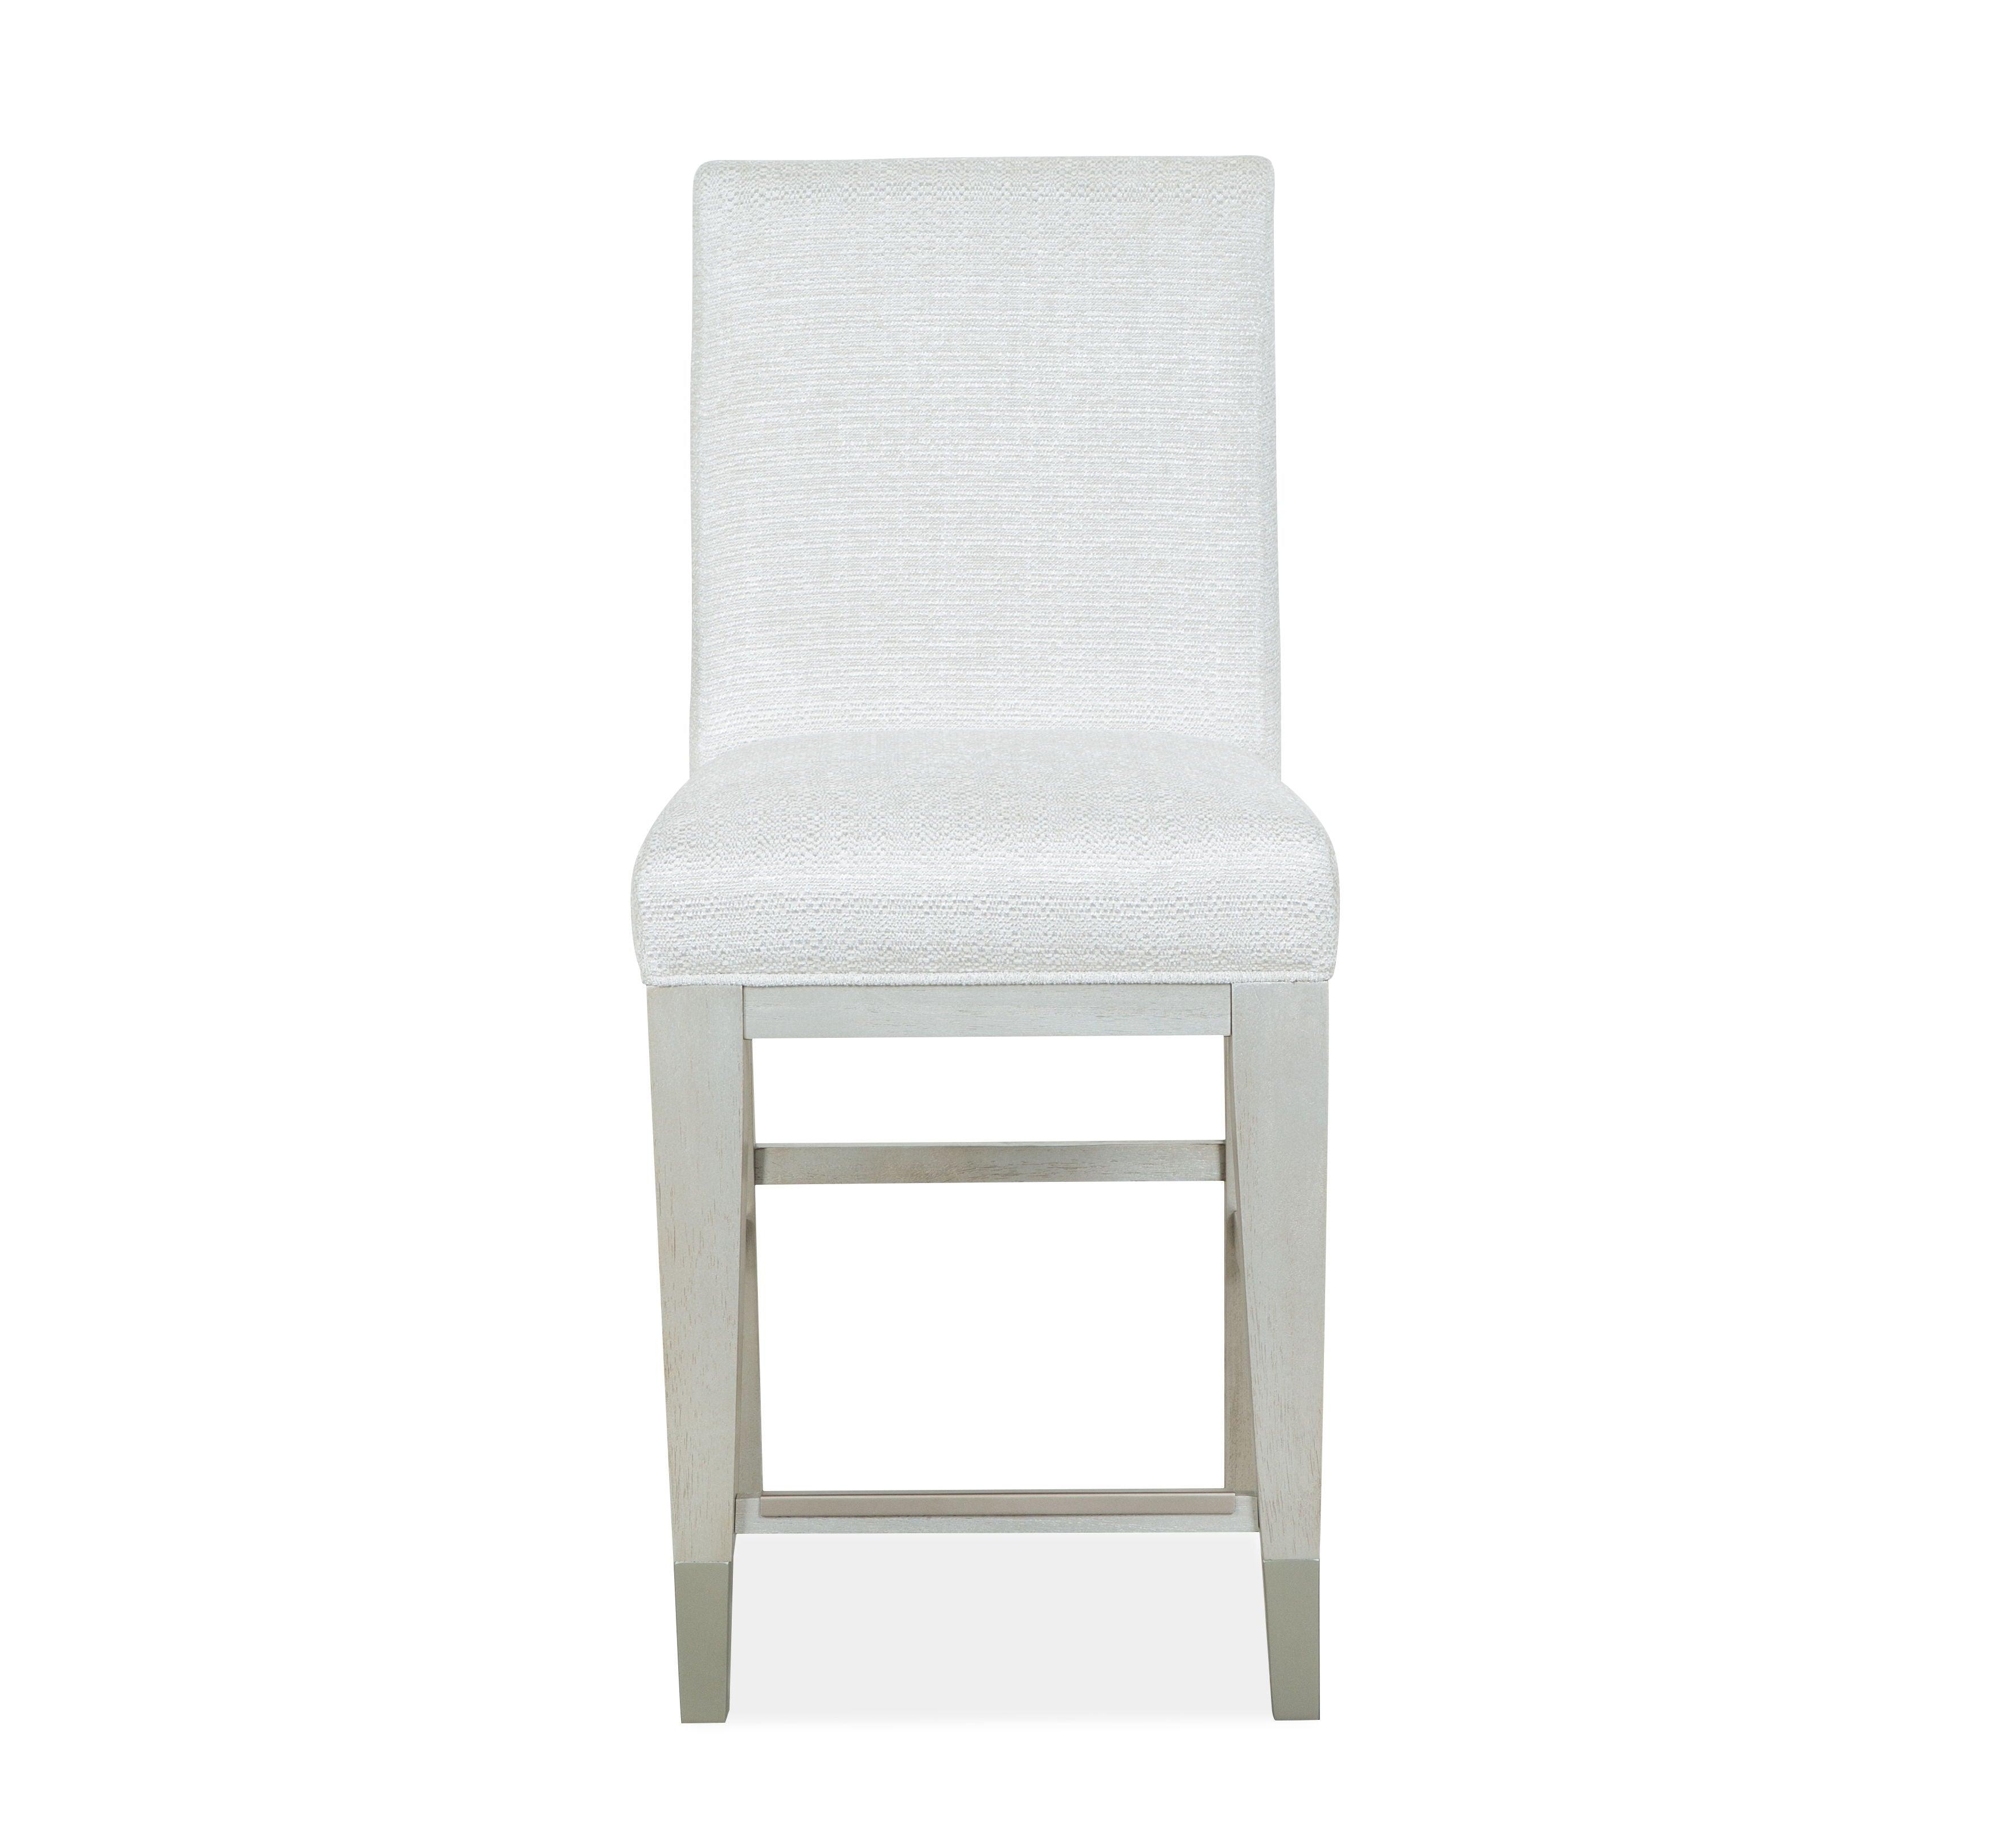 Magnussen Furniture - Lenox - Counter Chair With Upholstered Seat and Back (Set of 2) - Warm Silver - 5th Avenue Furniture